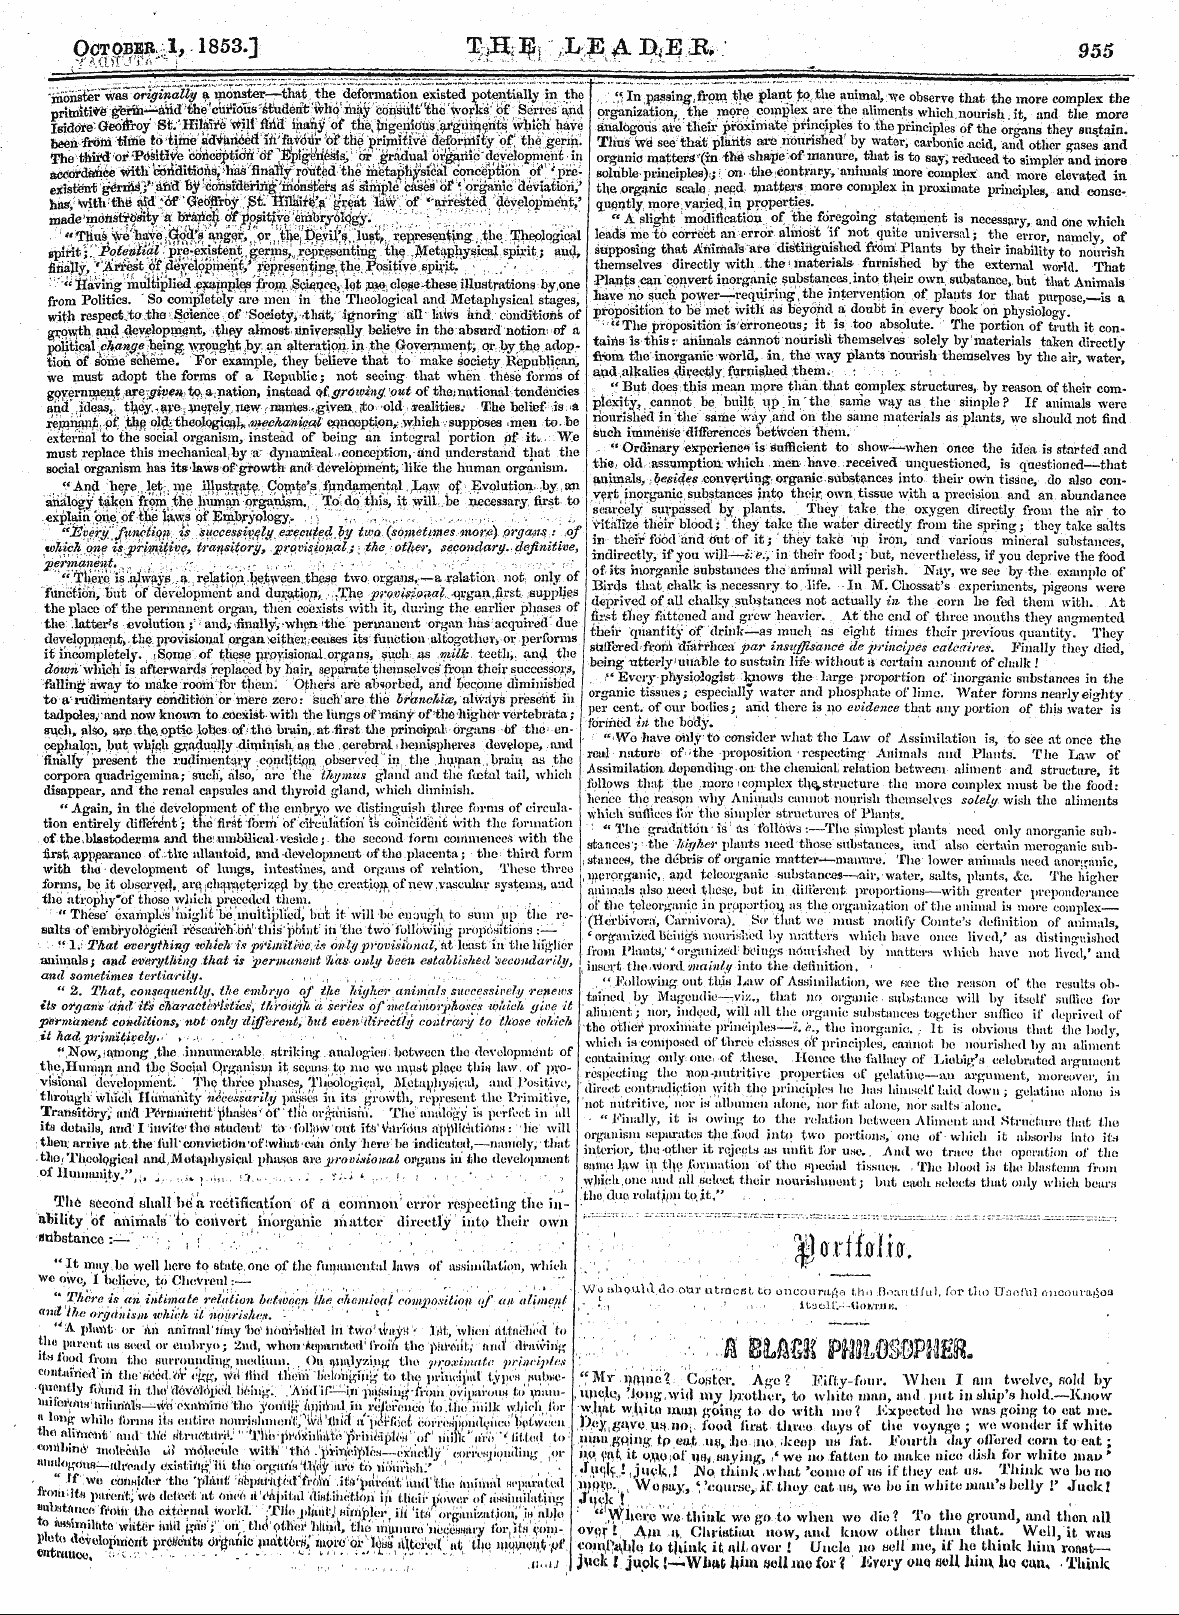 Leader (1850-1860): jS F Y, 2nd edition: 19